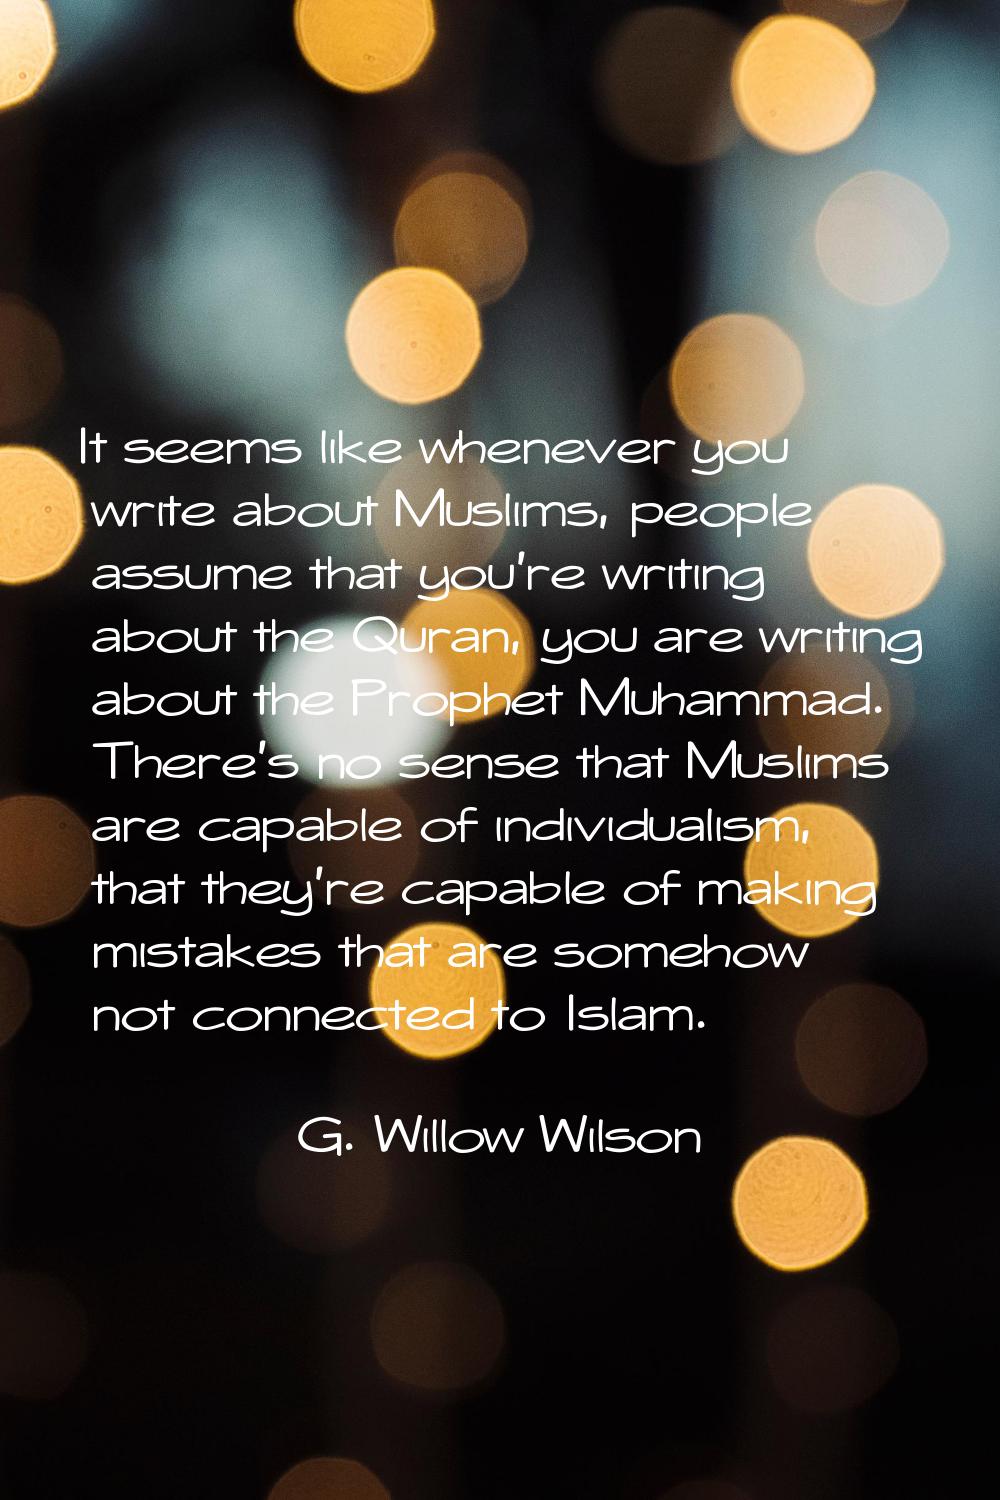 It seems like whenever you write about Muslims, people assume that you're writing about the Quran, 